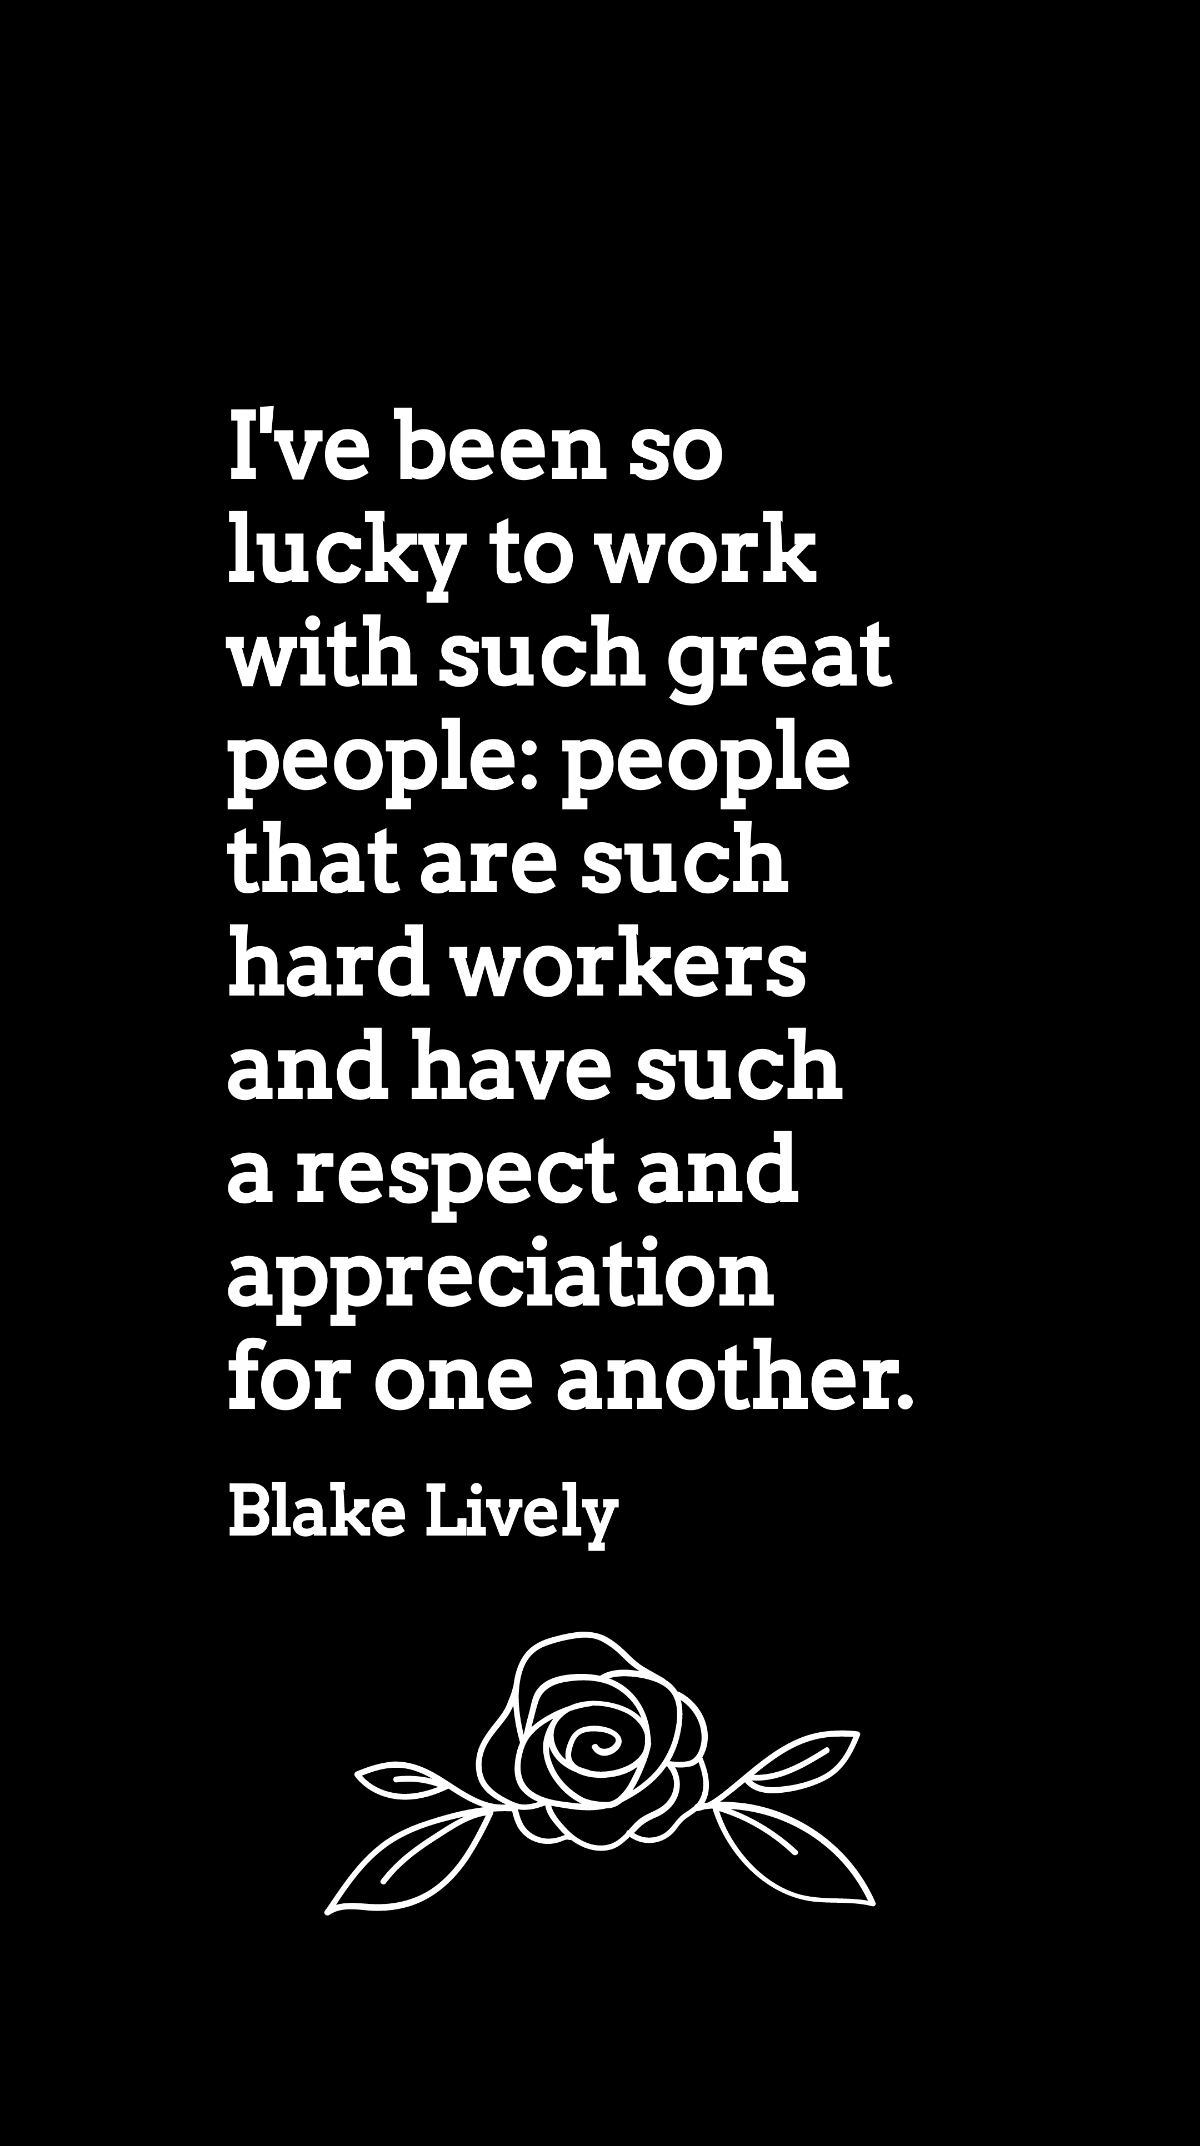 Blake Lively - I've been so lucky to work with such great people: people that are such hard workers and have such a respect and appreciation for one another.